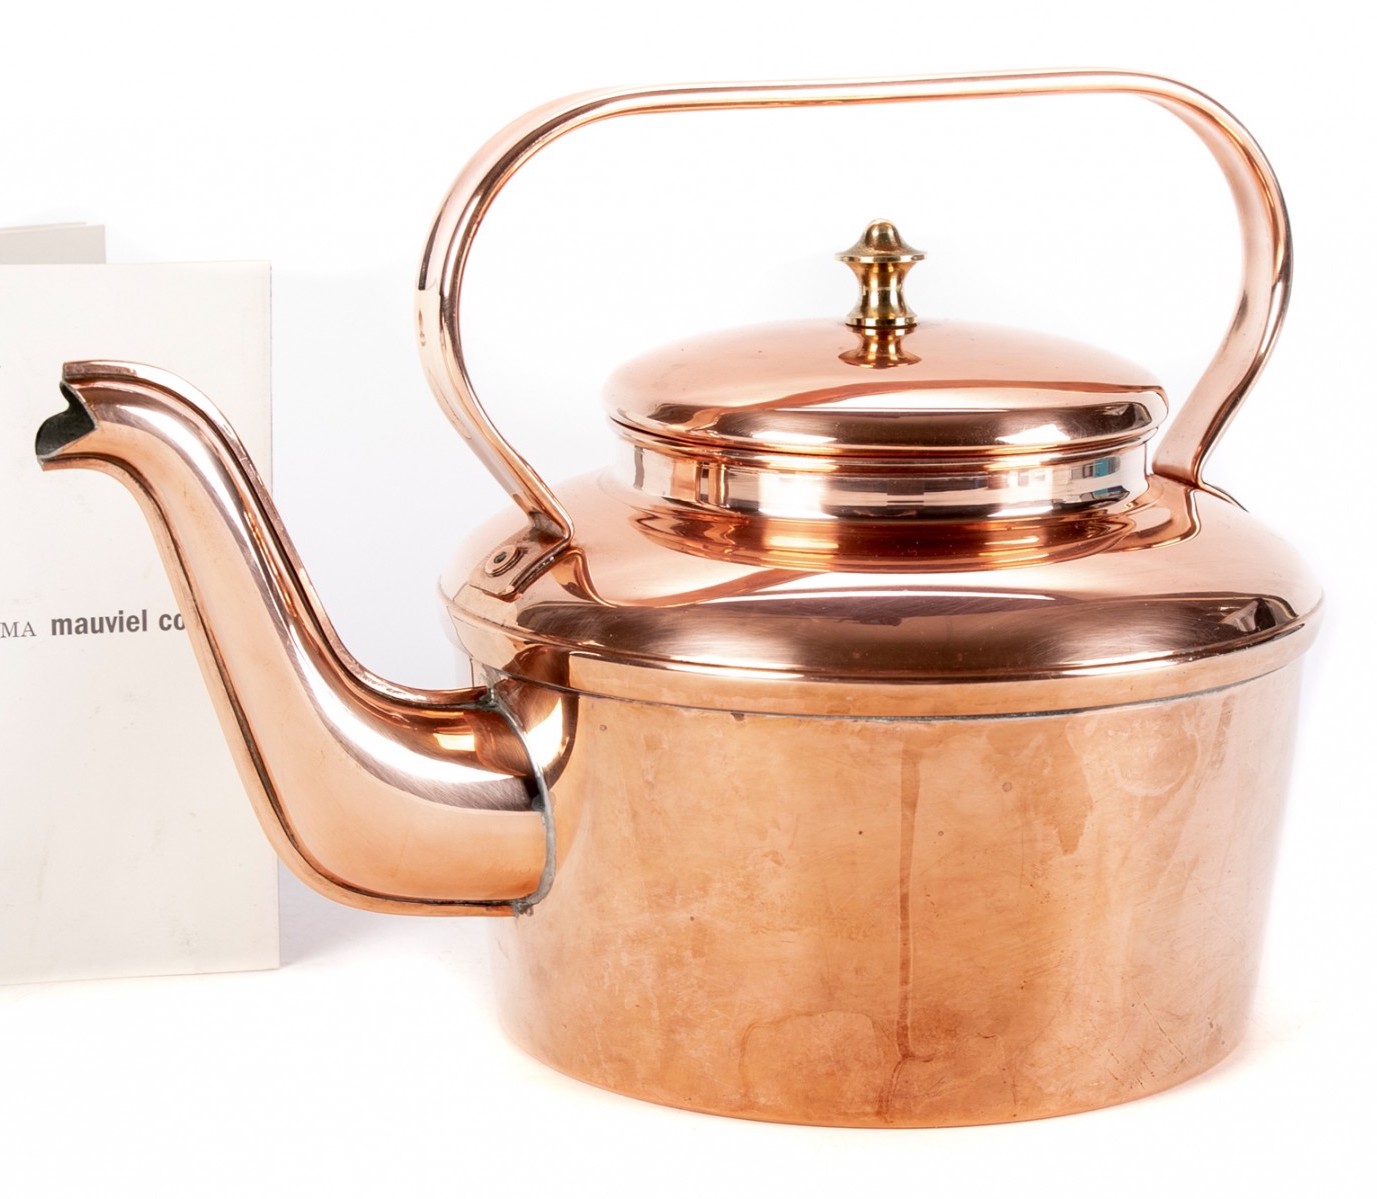 Farmhouse Kitchen - FRENCH MADE MAUVIEL COPPER TEA KETTLE Item #150827